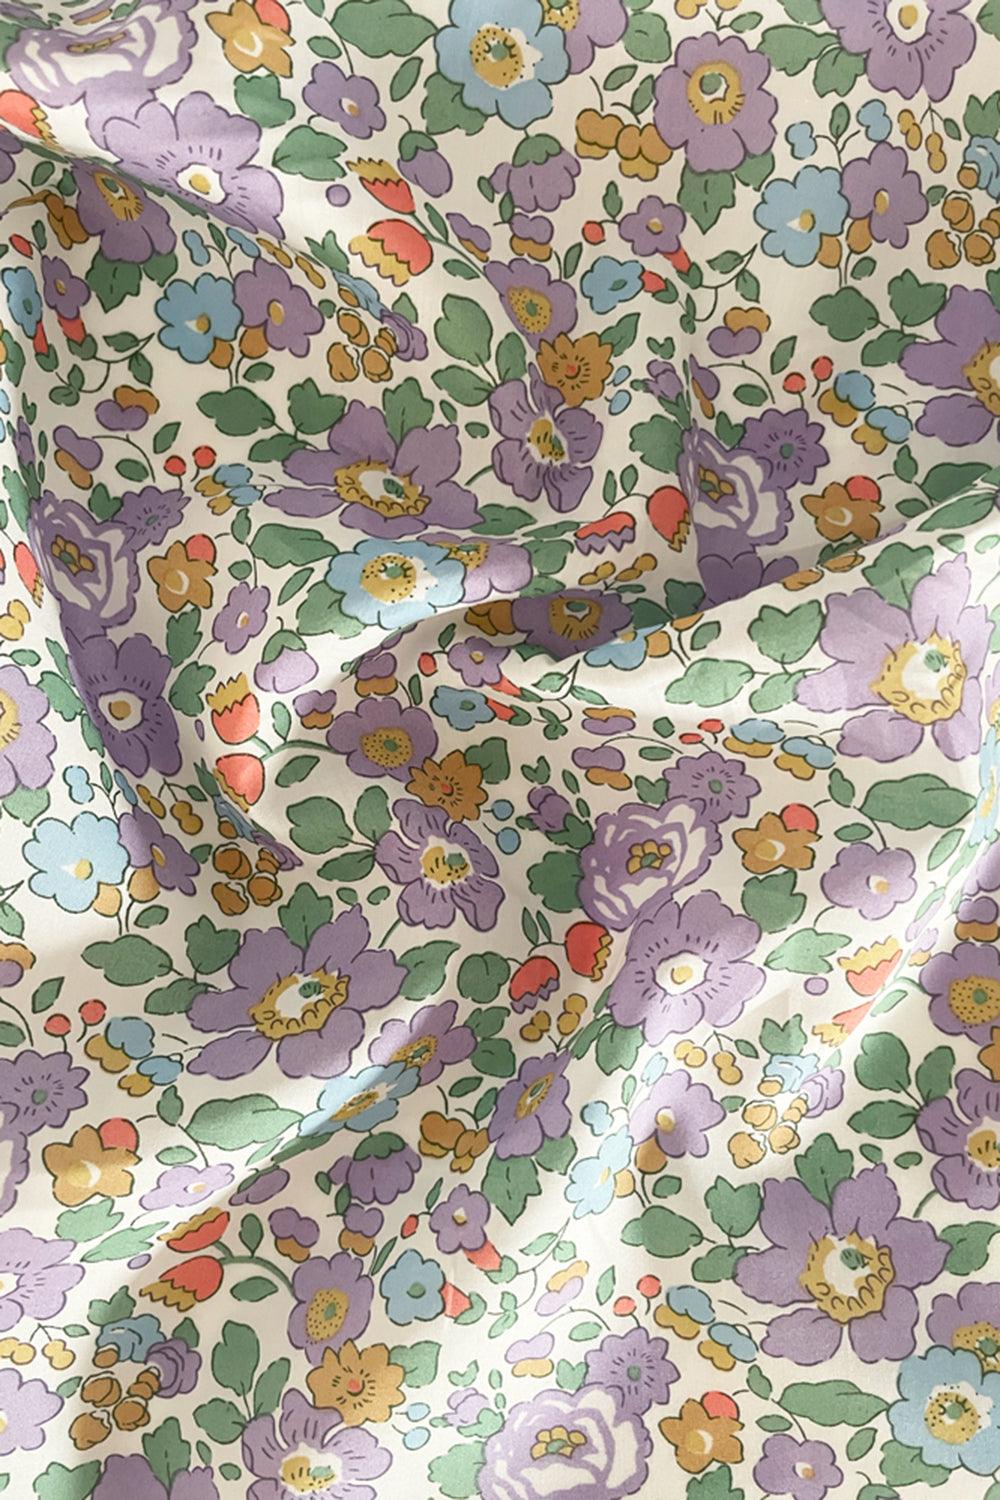 Bedding made with Liberty Fabric BETSY POWDER PURPLE - Coco & Wolf